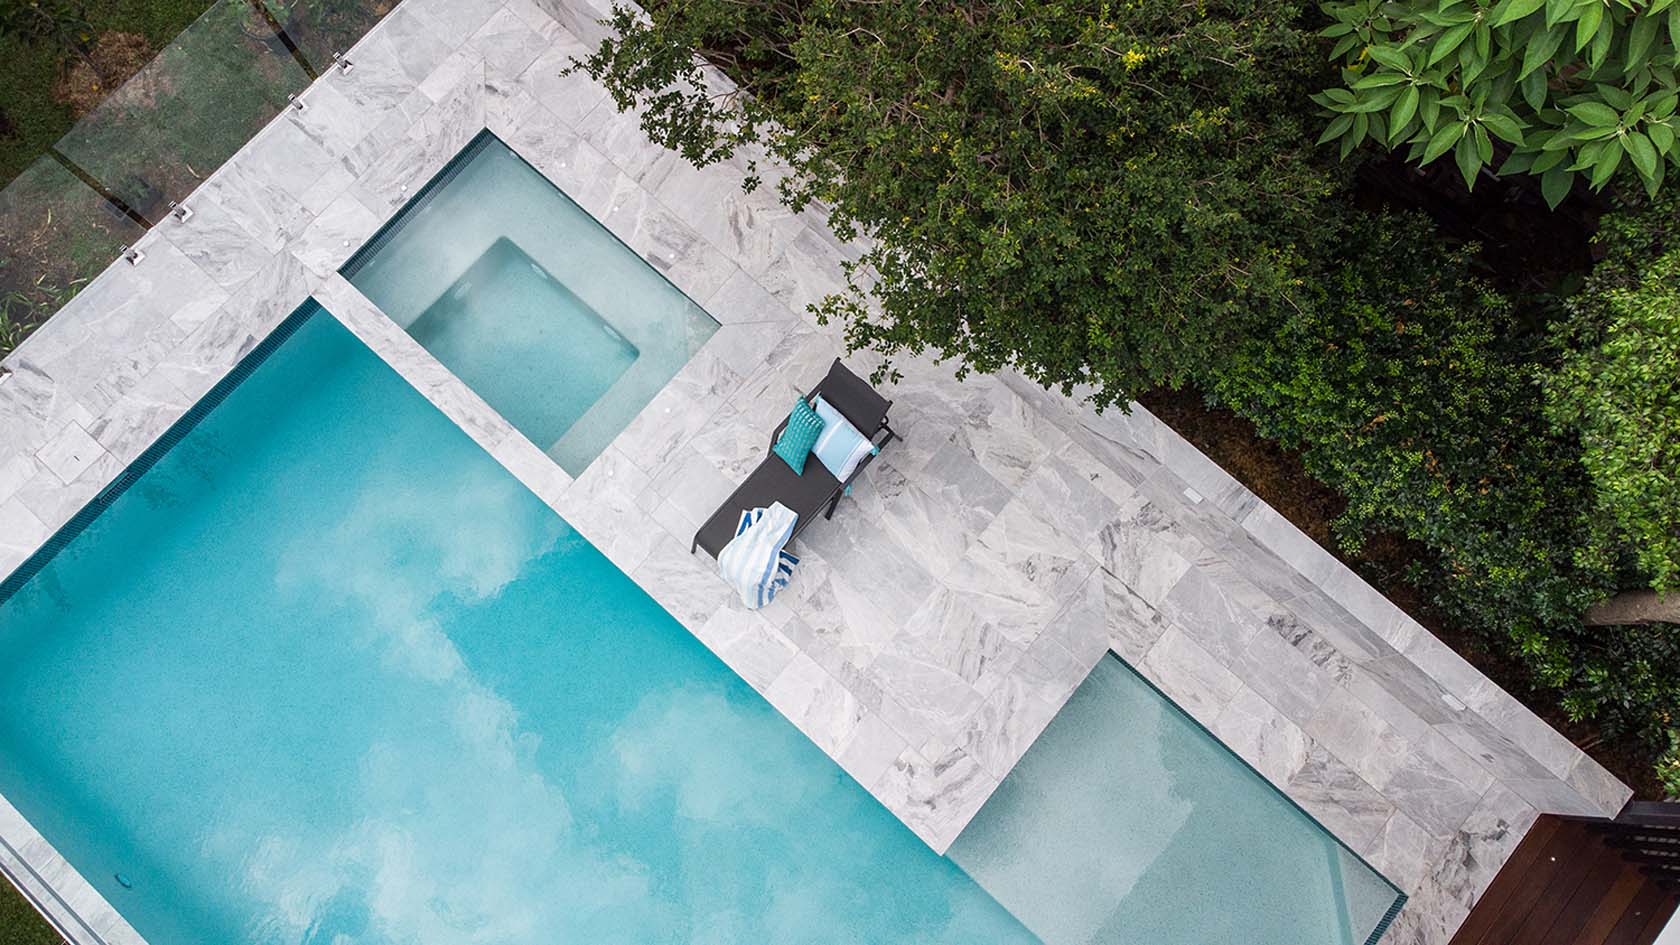 London Grey Marble pool coping and surround tiles with Peacock glass waterline